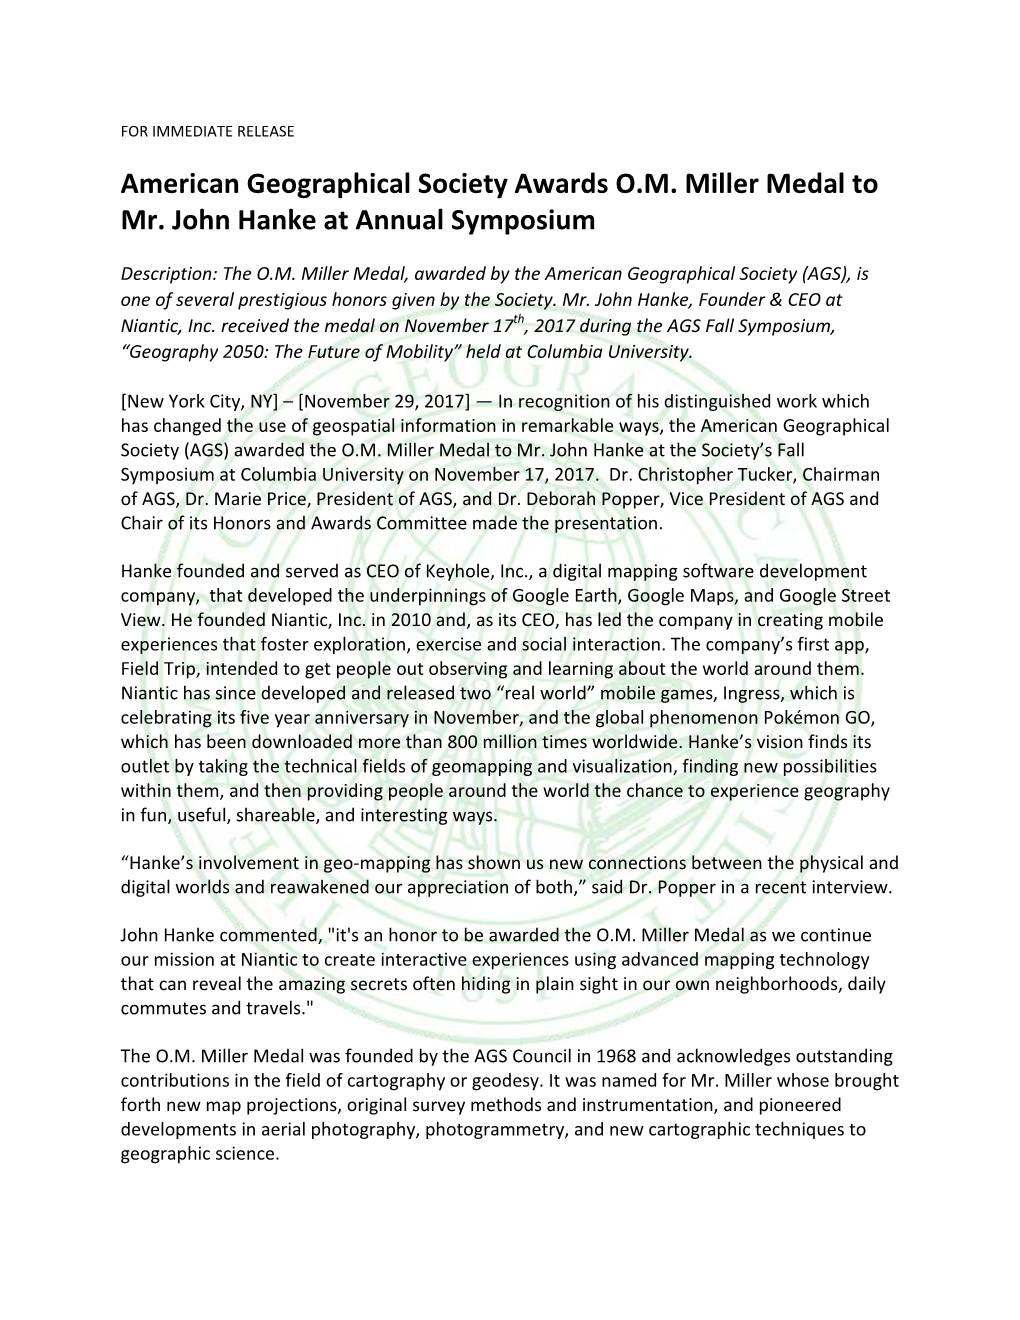 American Geographical Society Awards O.M. Miller Medal to Mr